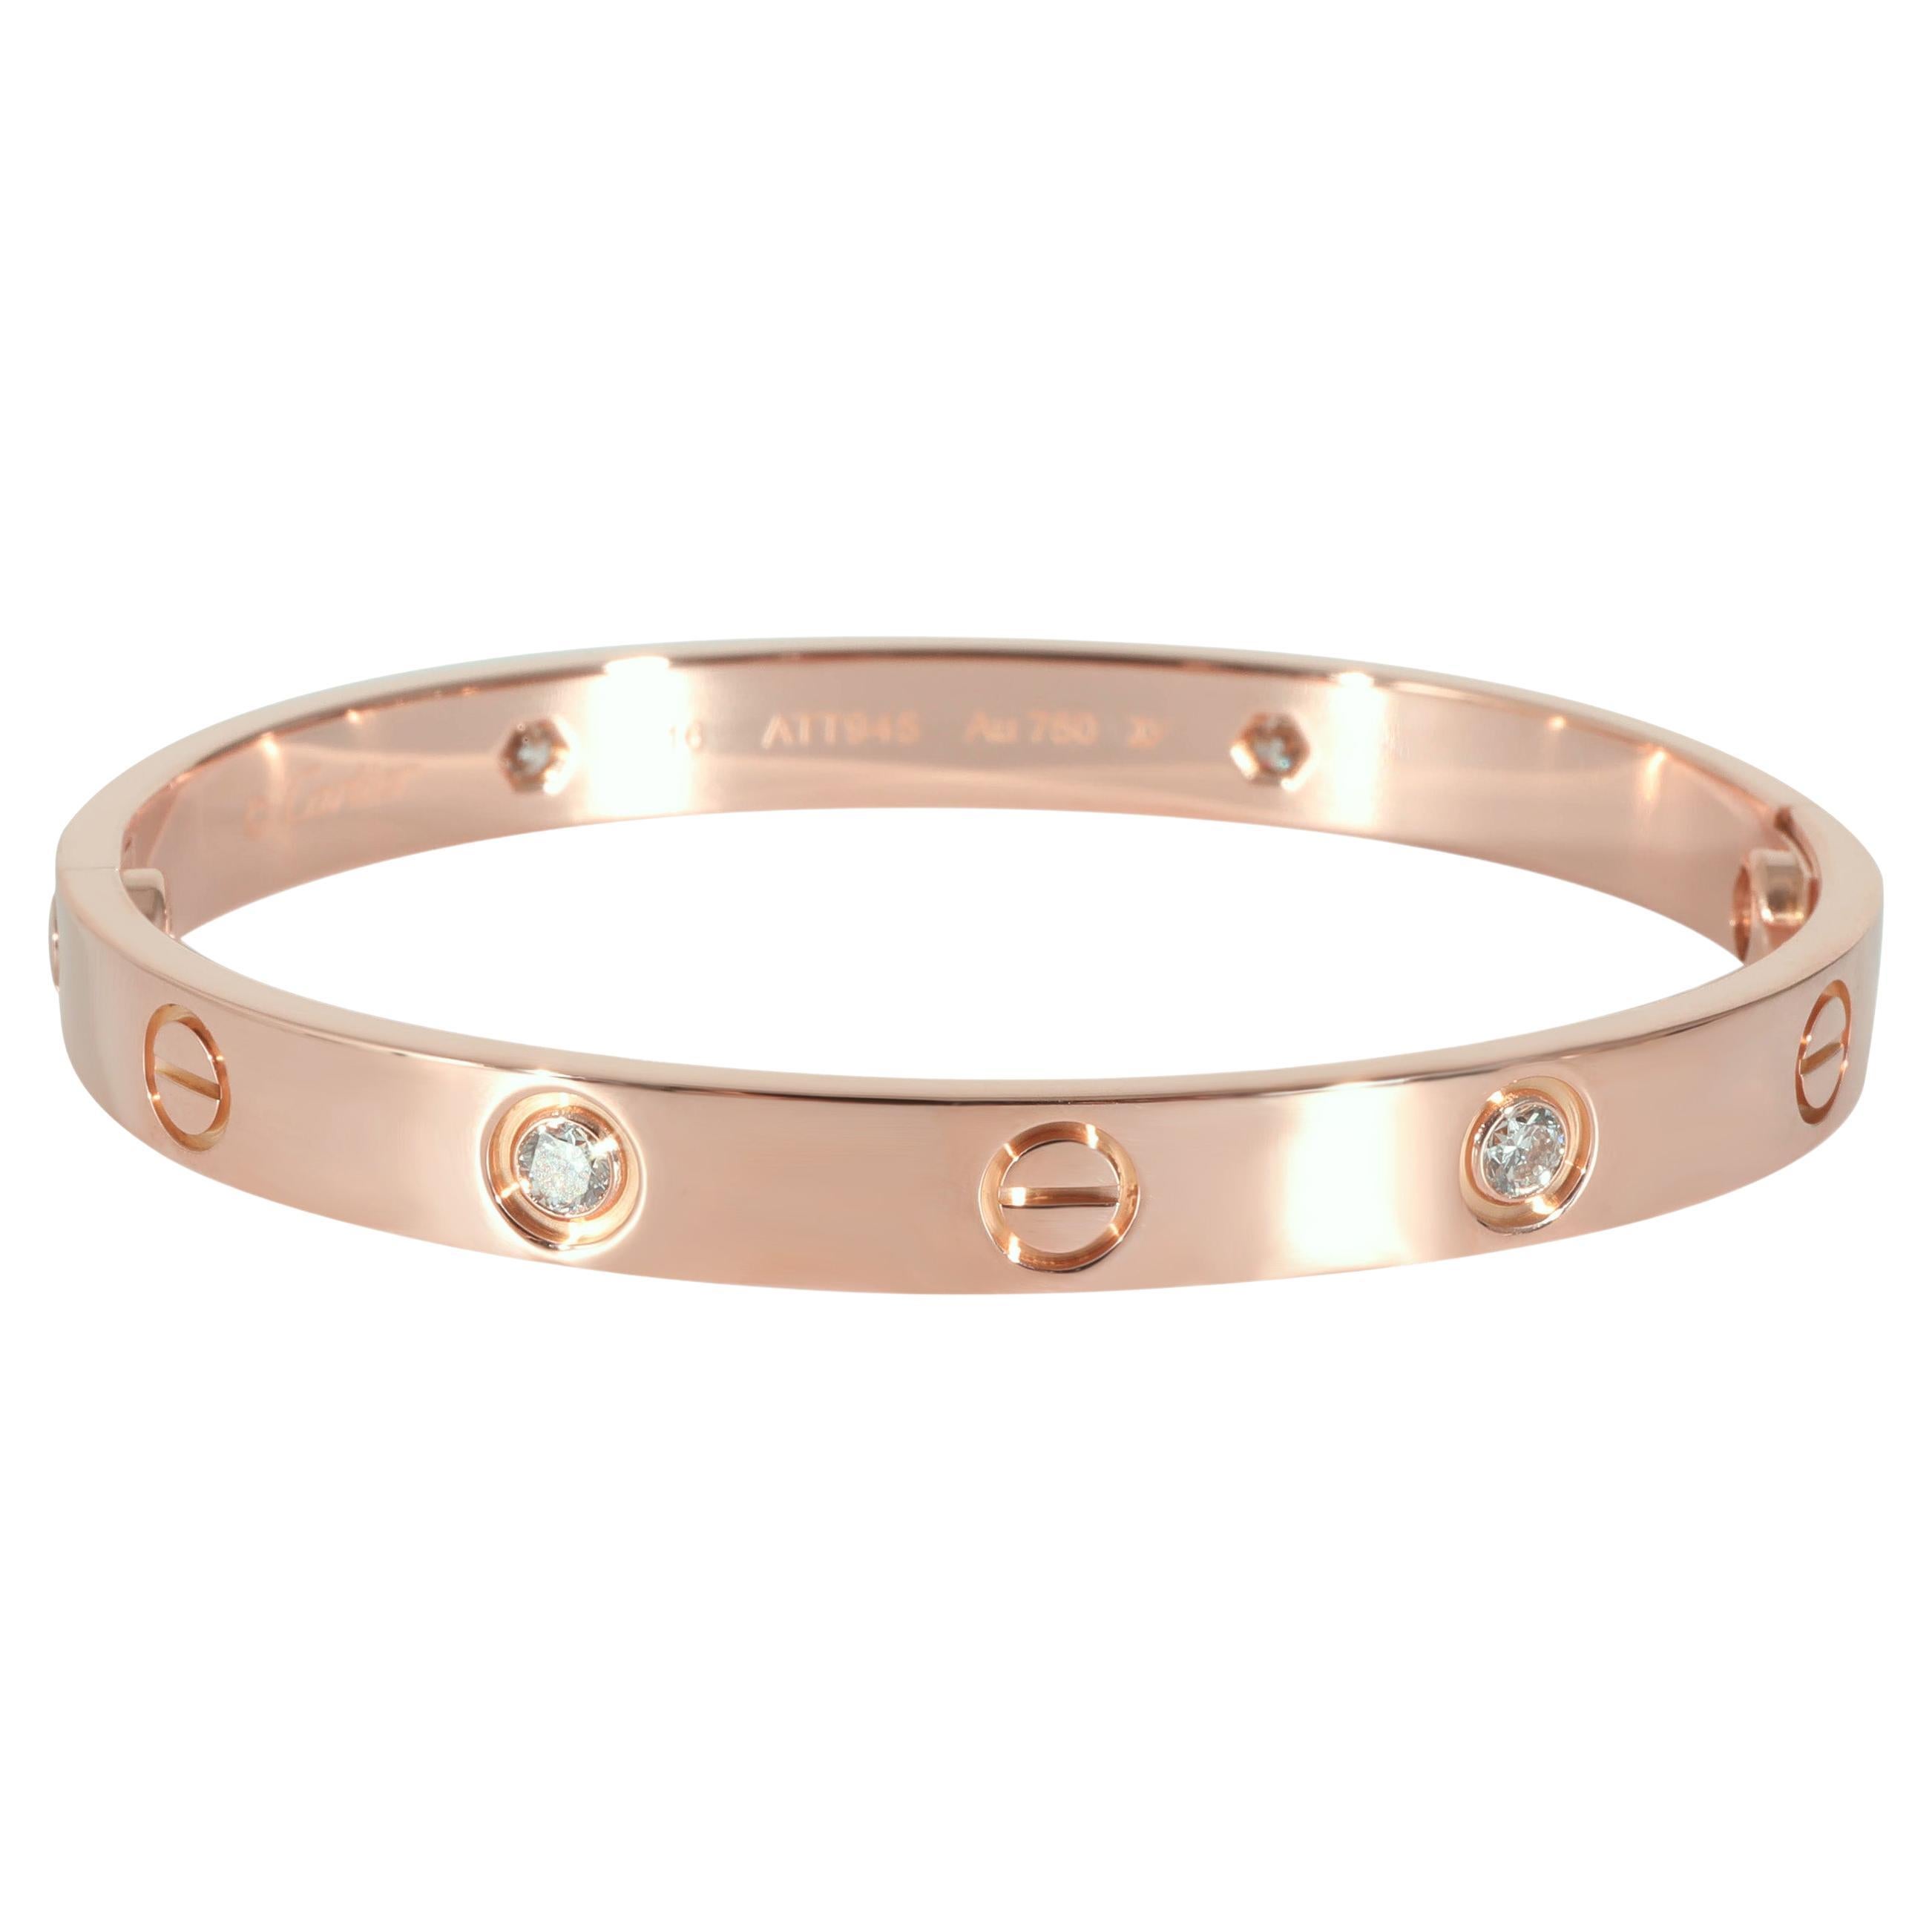 Cartier Love Diamond Bracelet in 18k Yellow Gold 0.42 CTW For Sale at ...